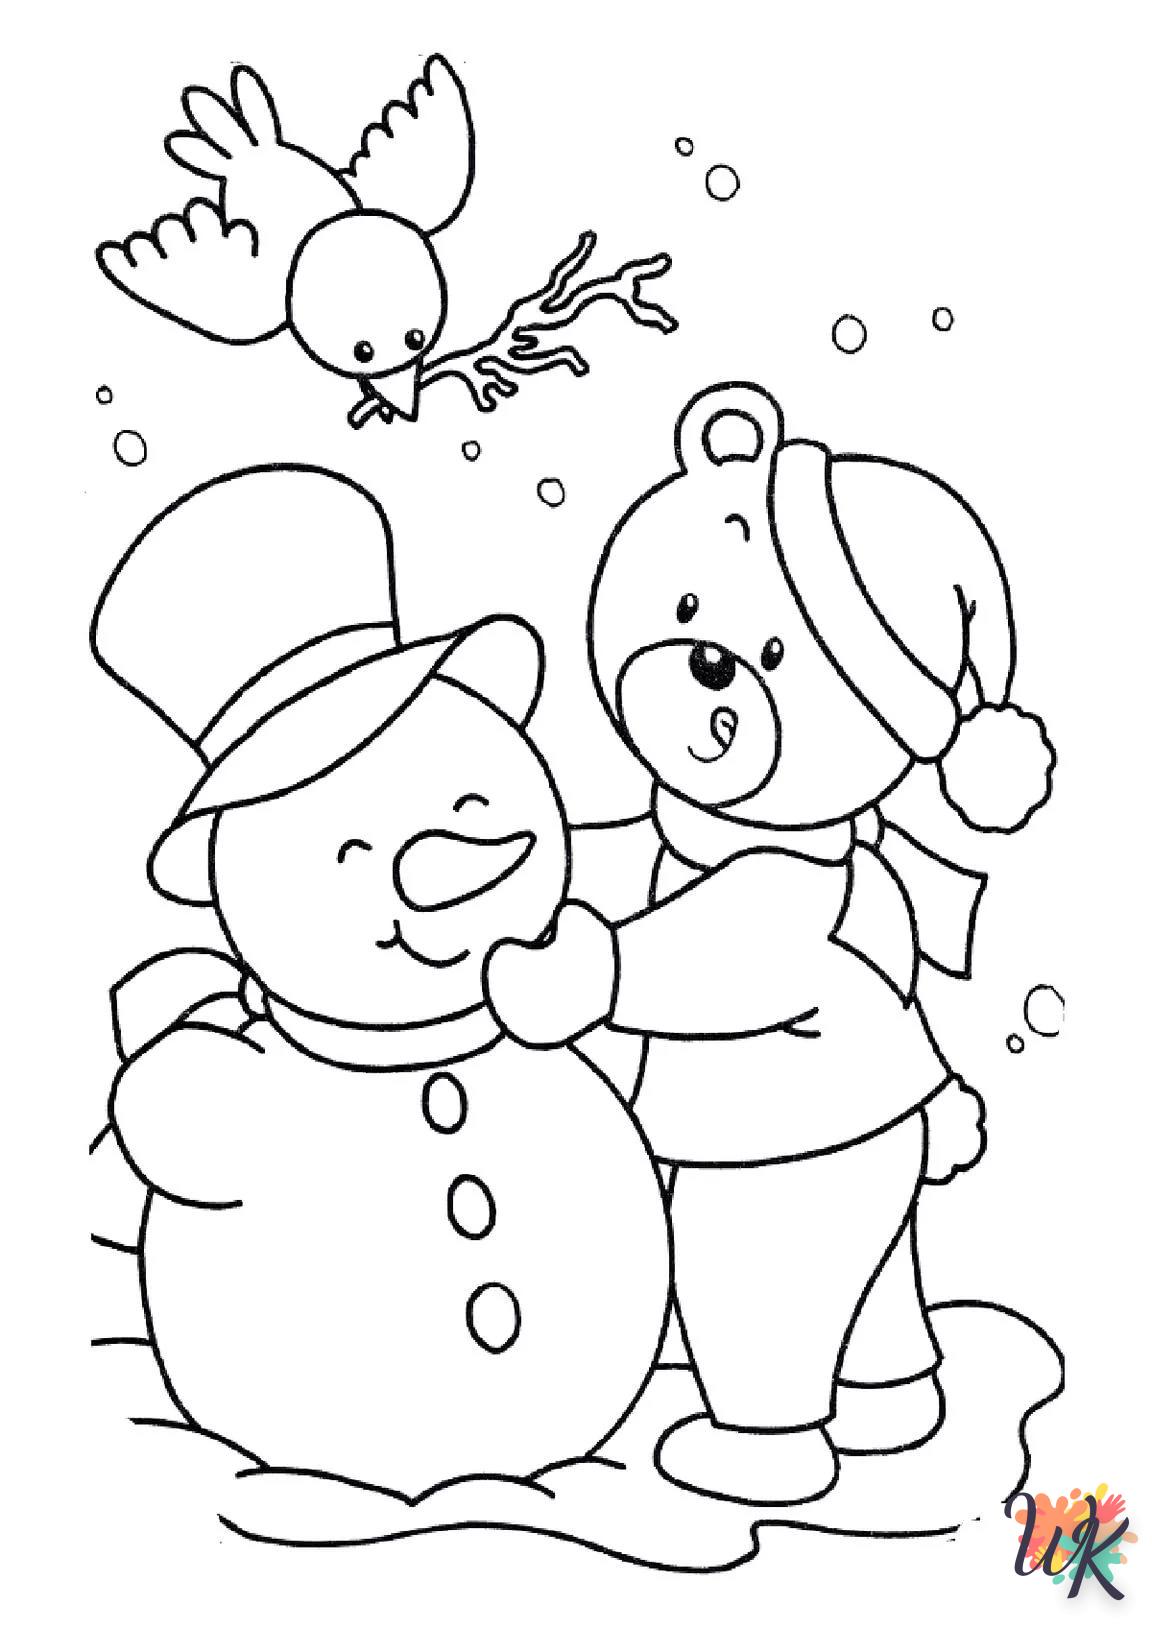 Snowman coloring page for children aged 3 to print